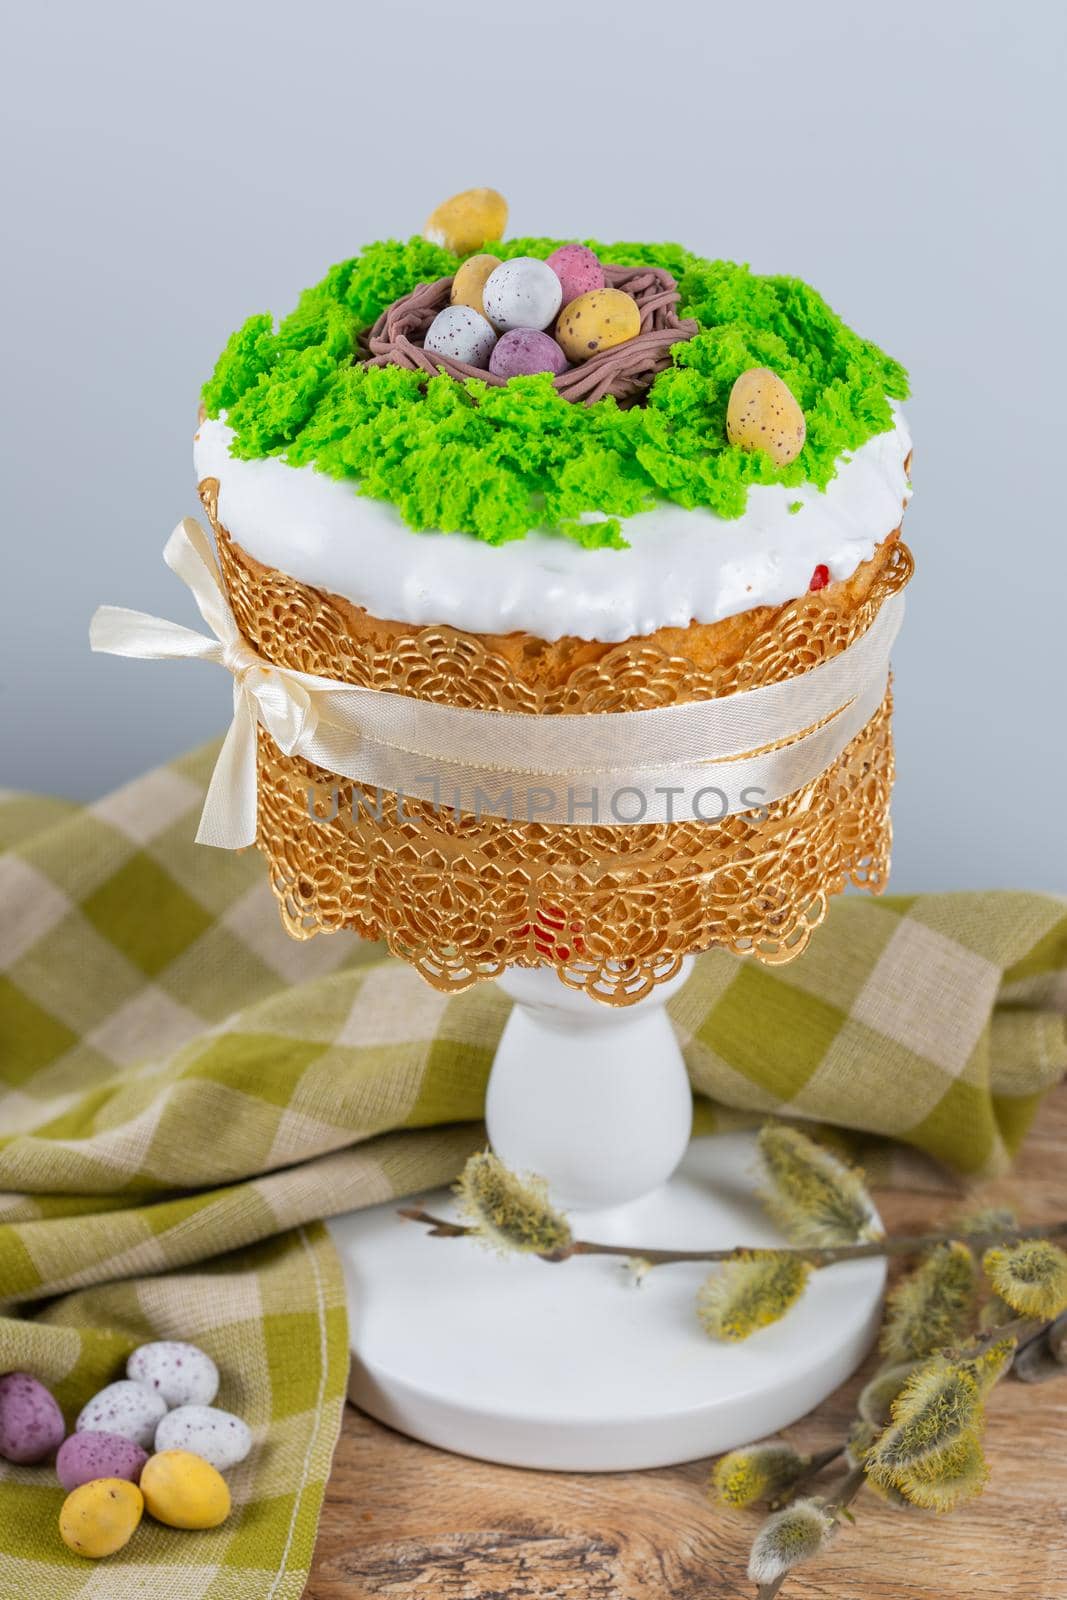 Easter cake made from yeast dough, decorated with edible moss with a nest  by galinasharapova